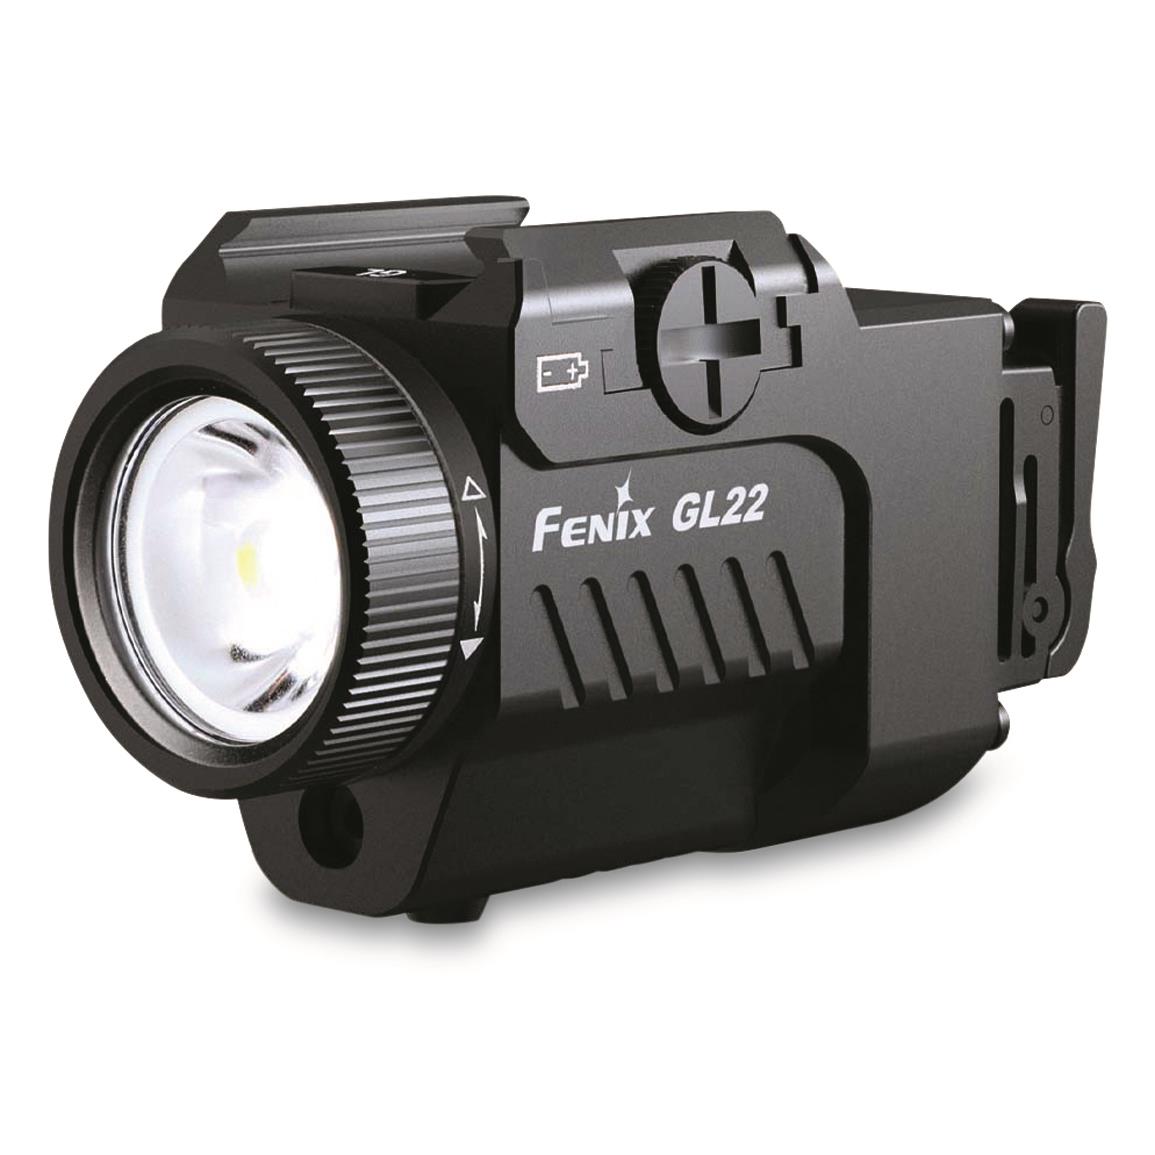 Fenix GL22 Tactical Pistol Light with Red Laser